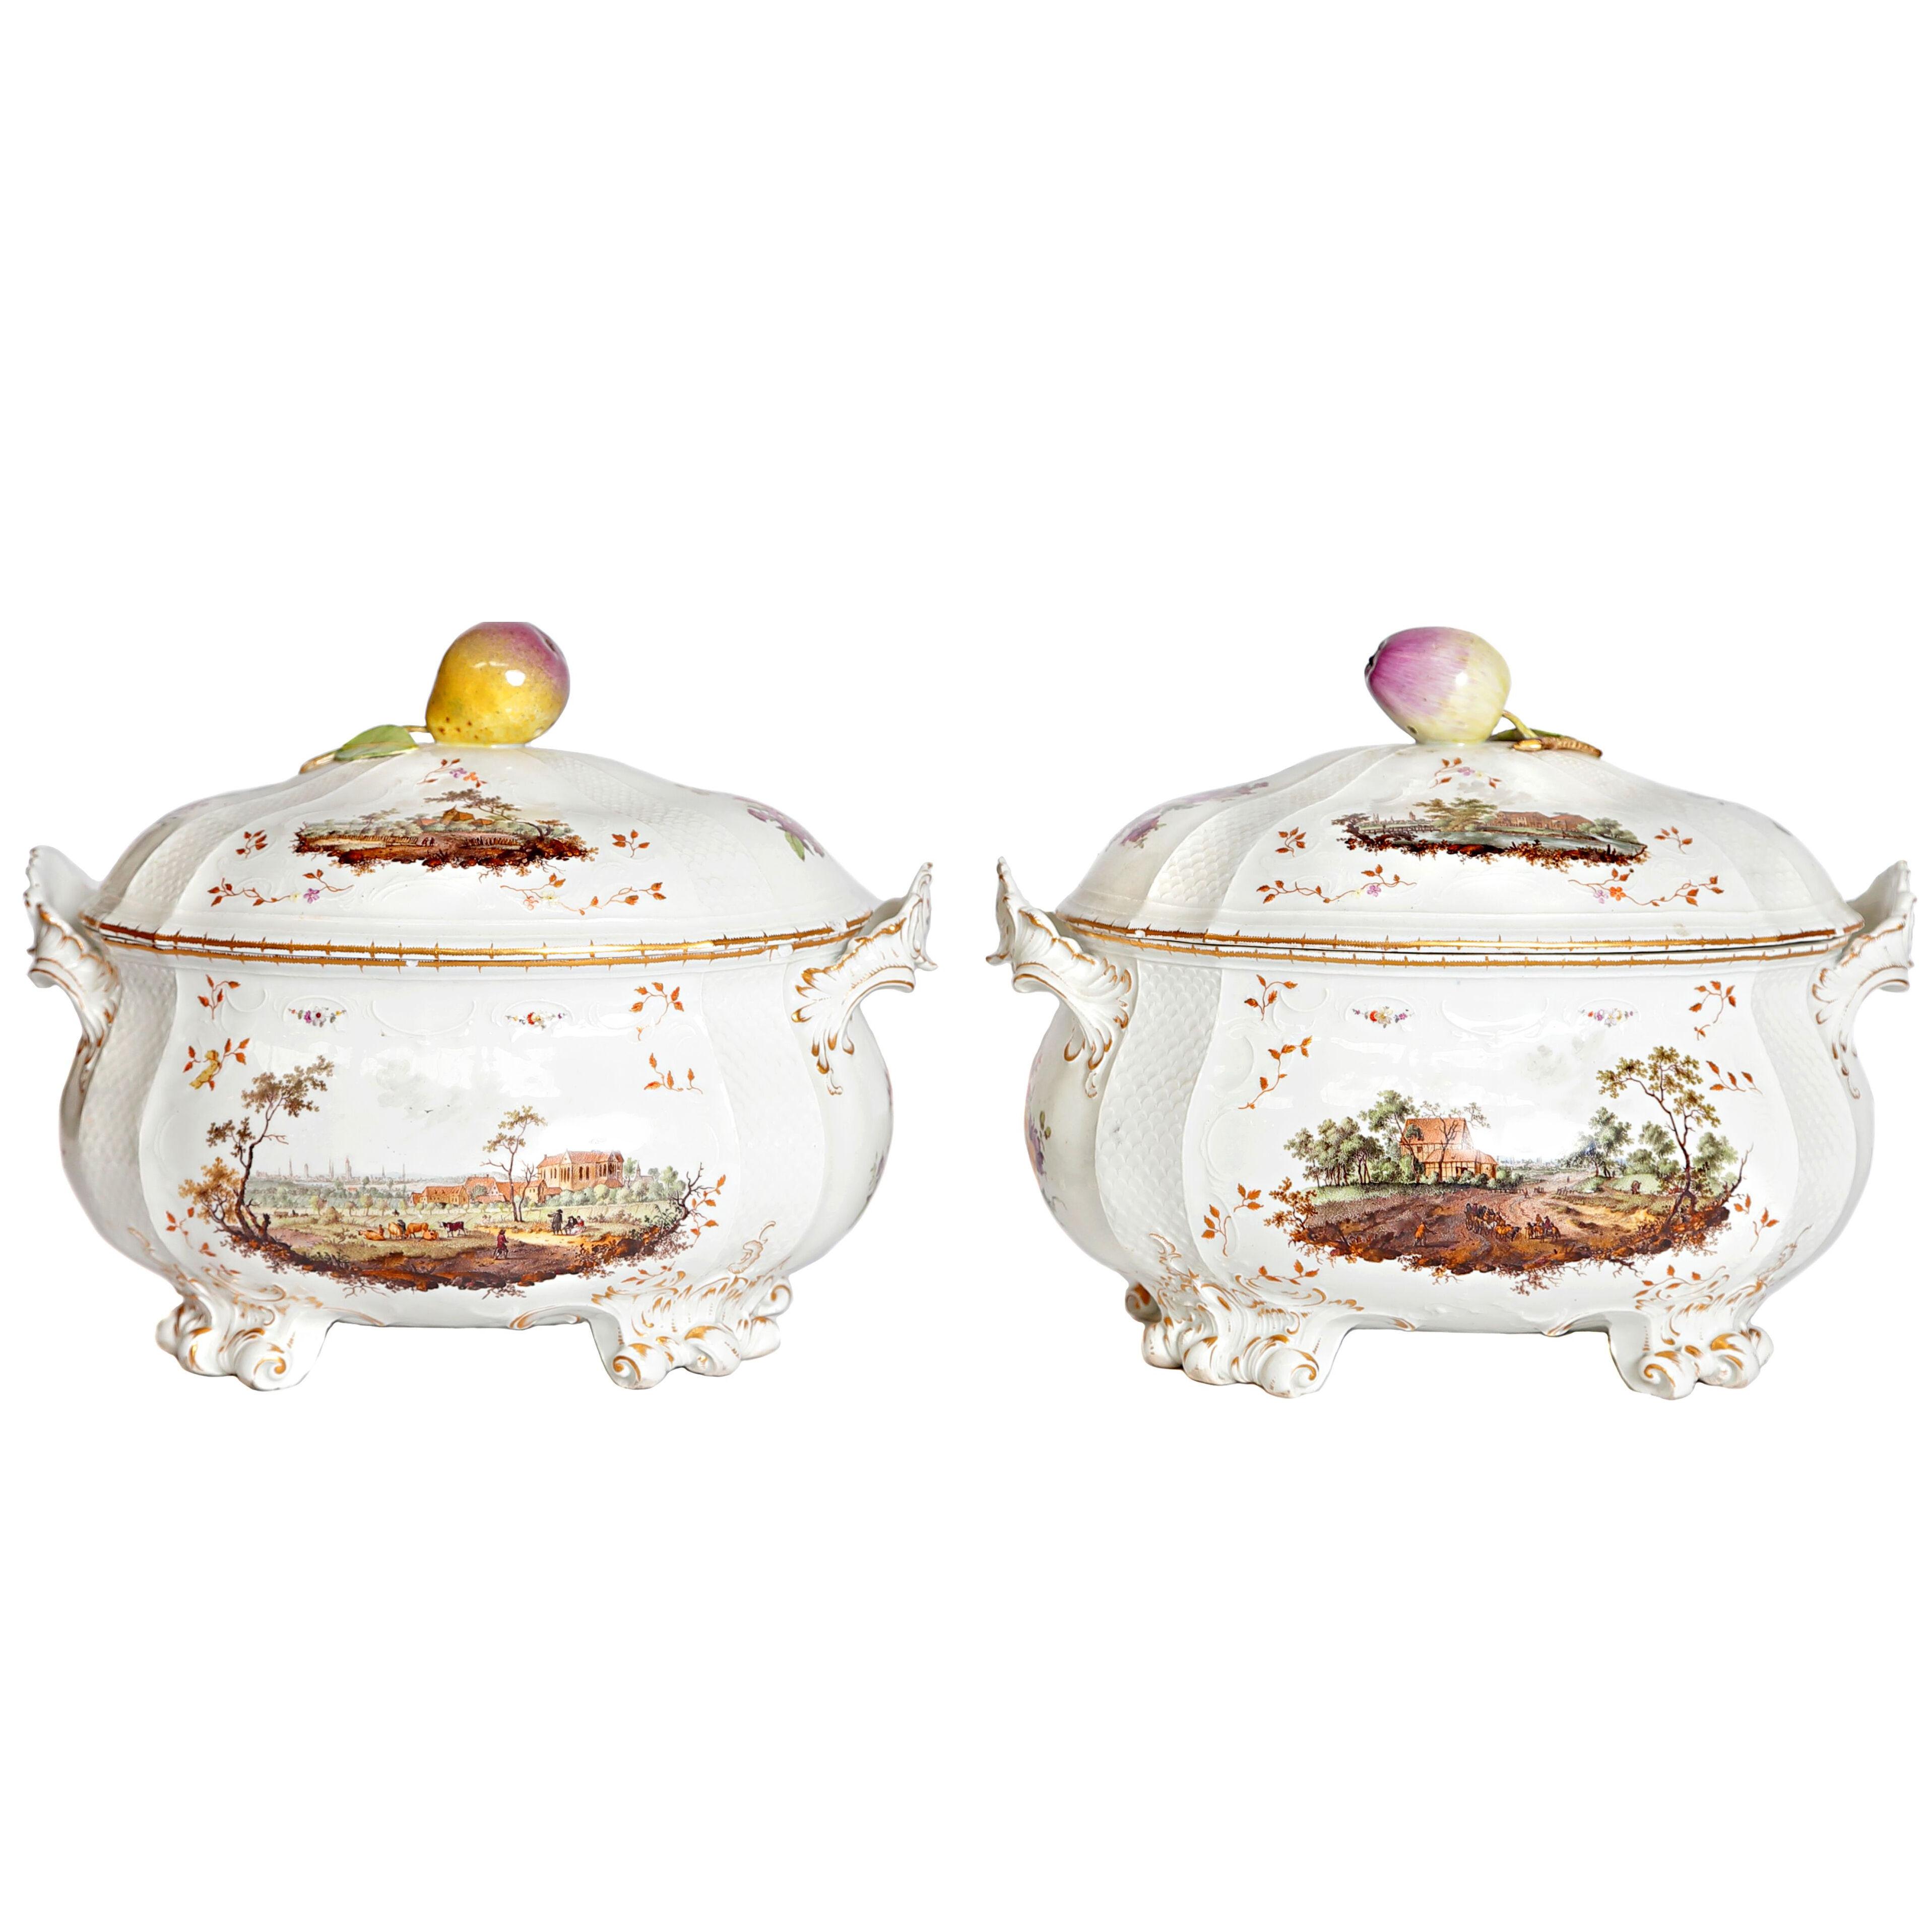 A Pair of Important Fürstenberg Porcelain Oval Two-Handled Tureens